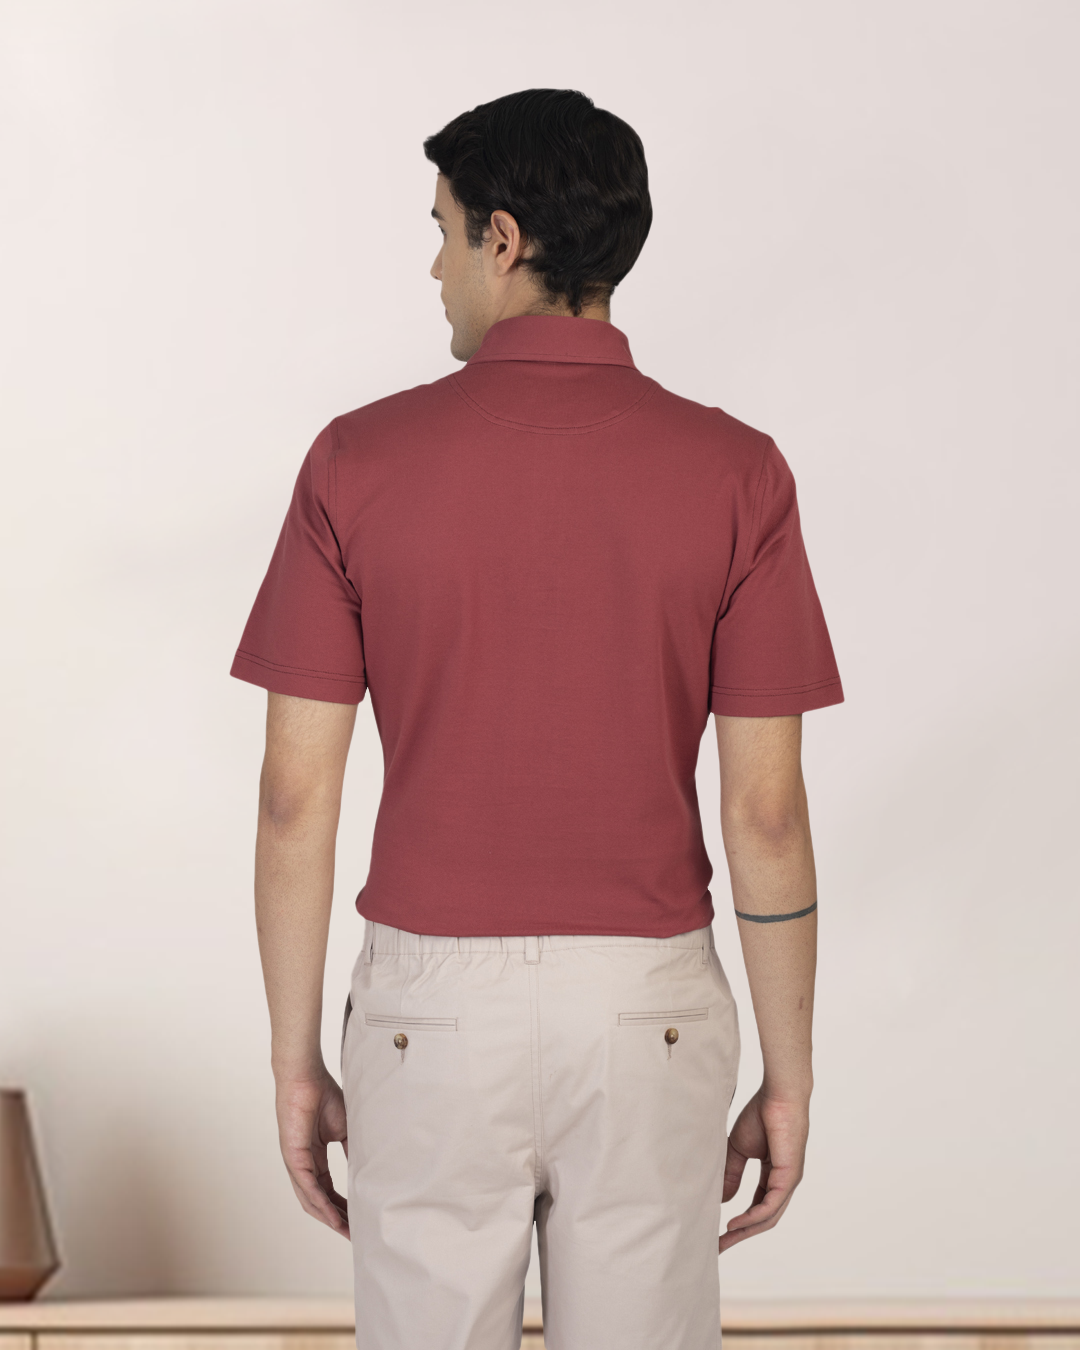 Back of model wearing the custom oxford polo shirt for men by Luxire in soft marsala